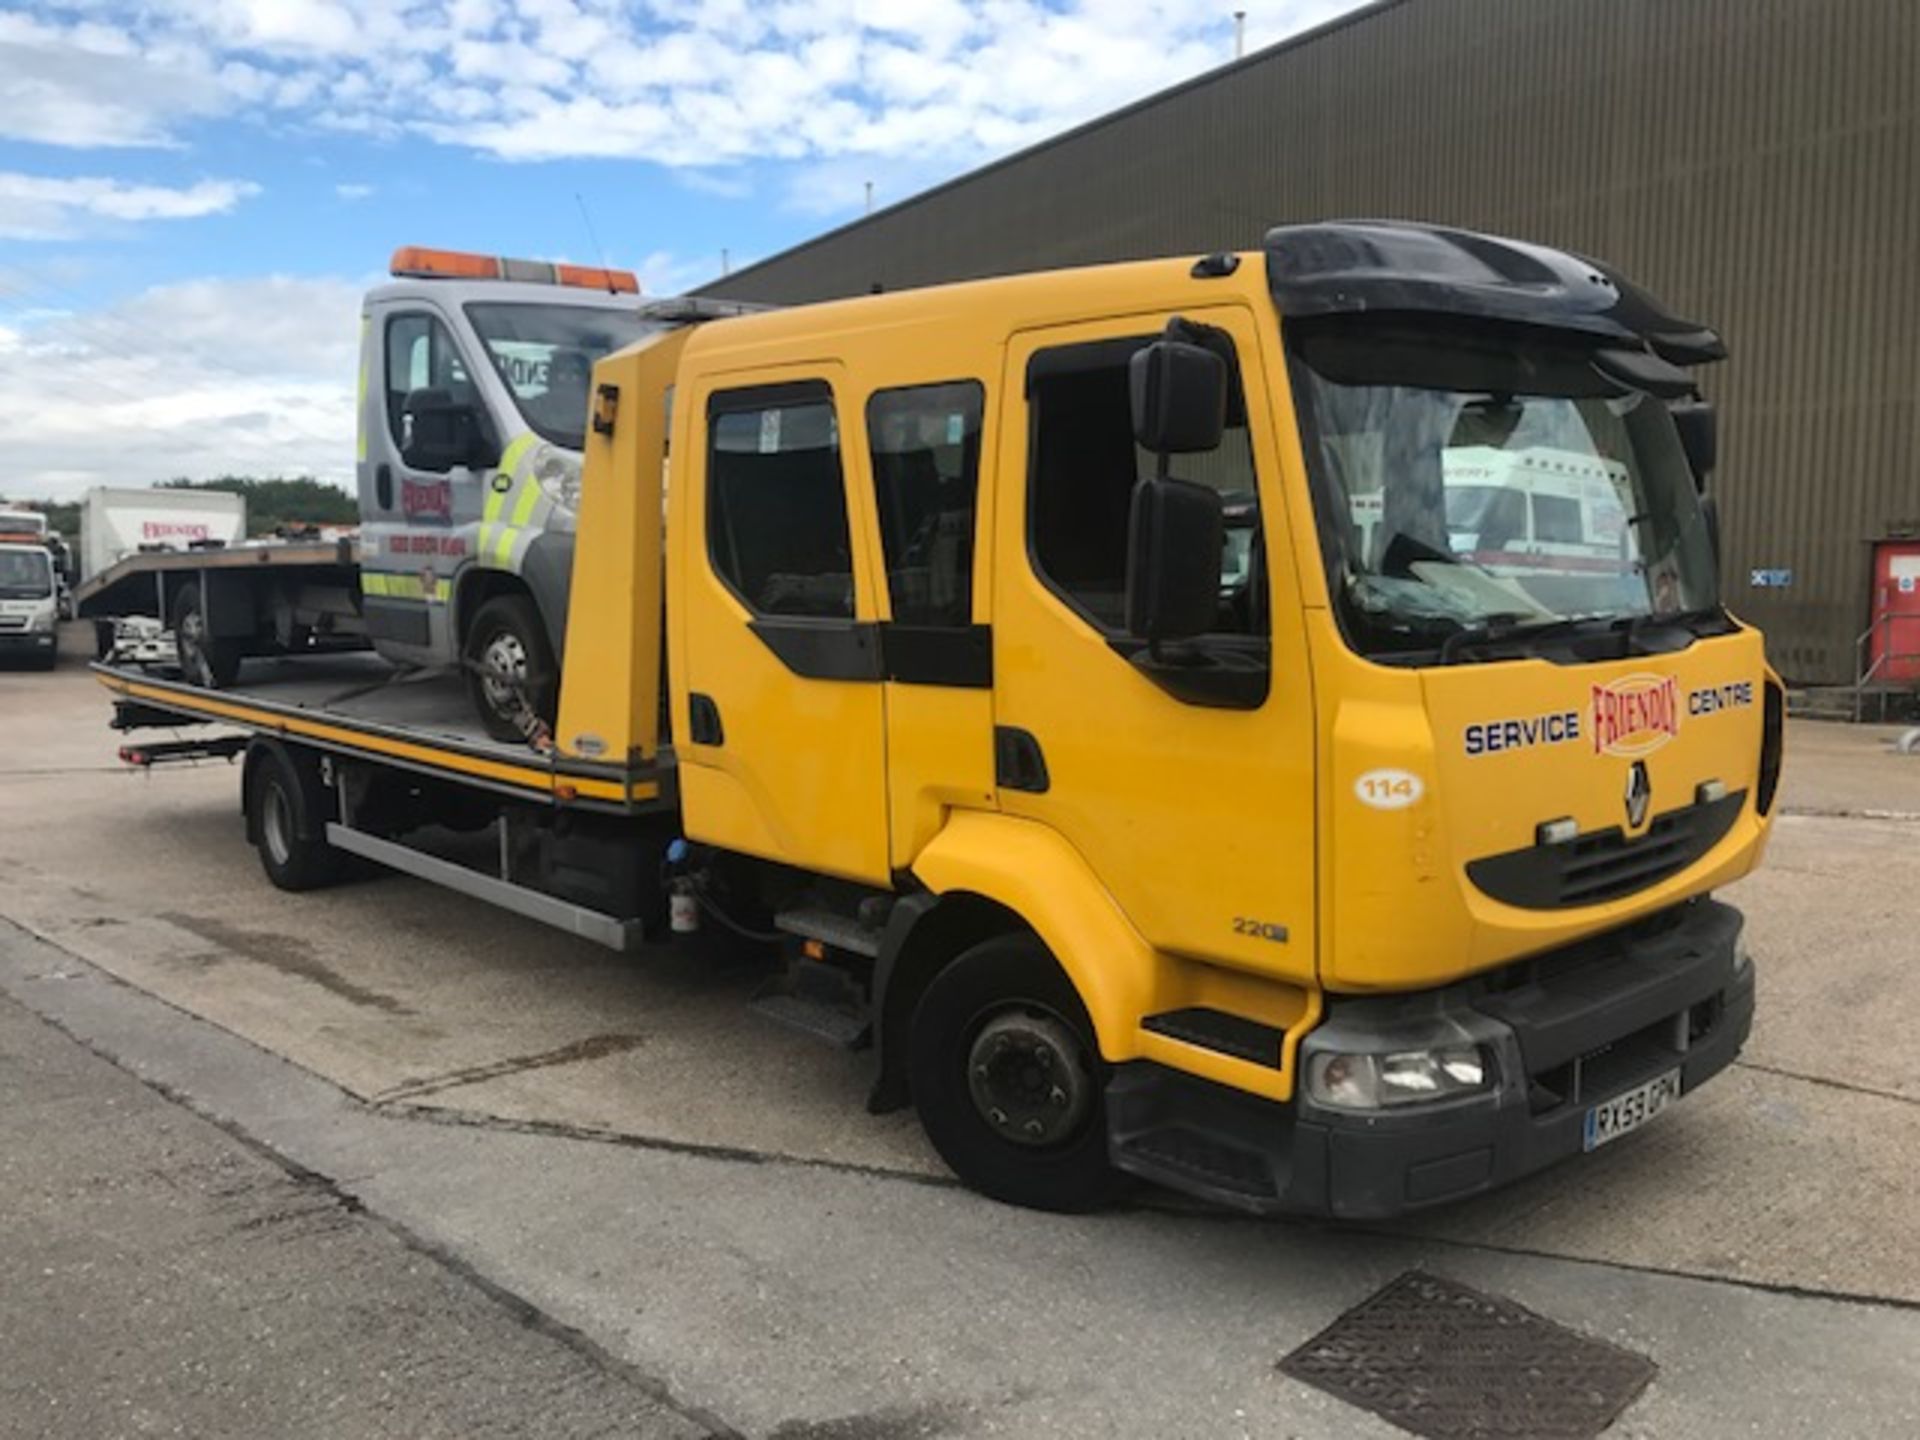 2010 Renault Midlum 220DXI 12t crew cab tilt and slide breakdown recovery vehicle with spec. lift,